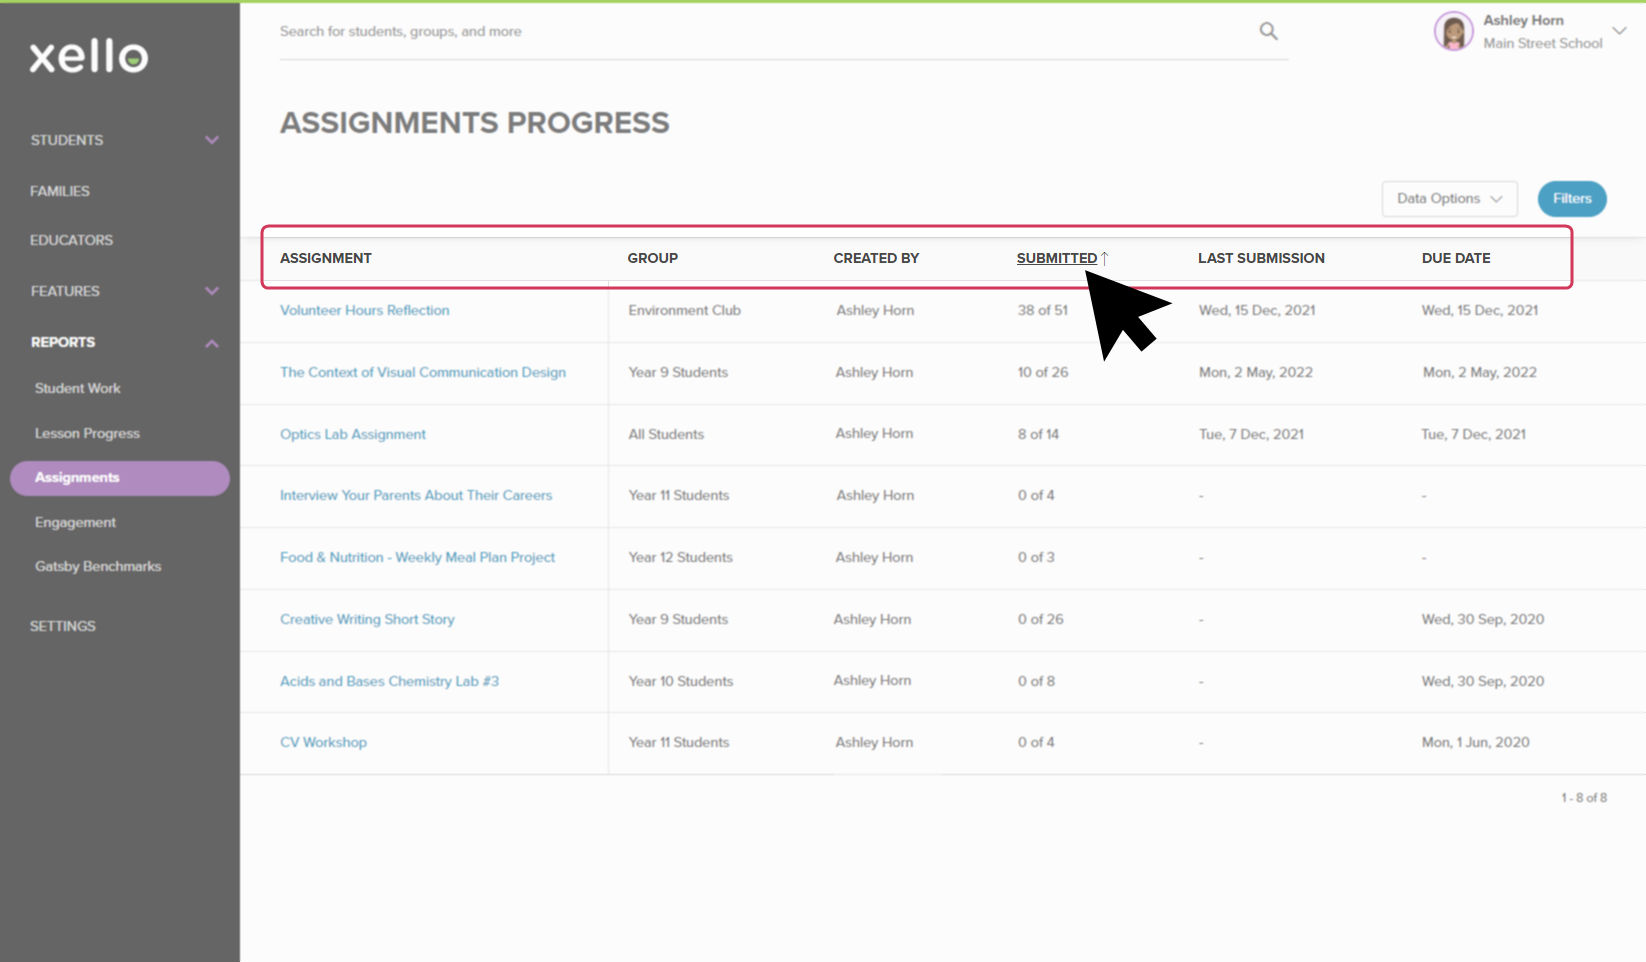 Filters menu open with the filters "Students with assessment results" and "Students without assessment results" selected